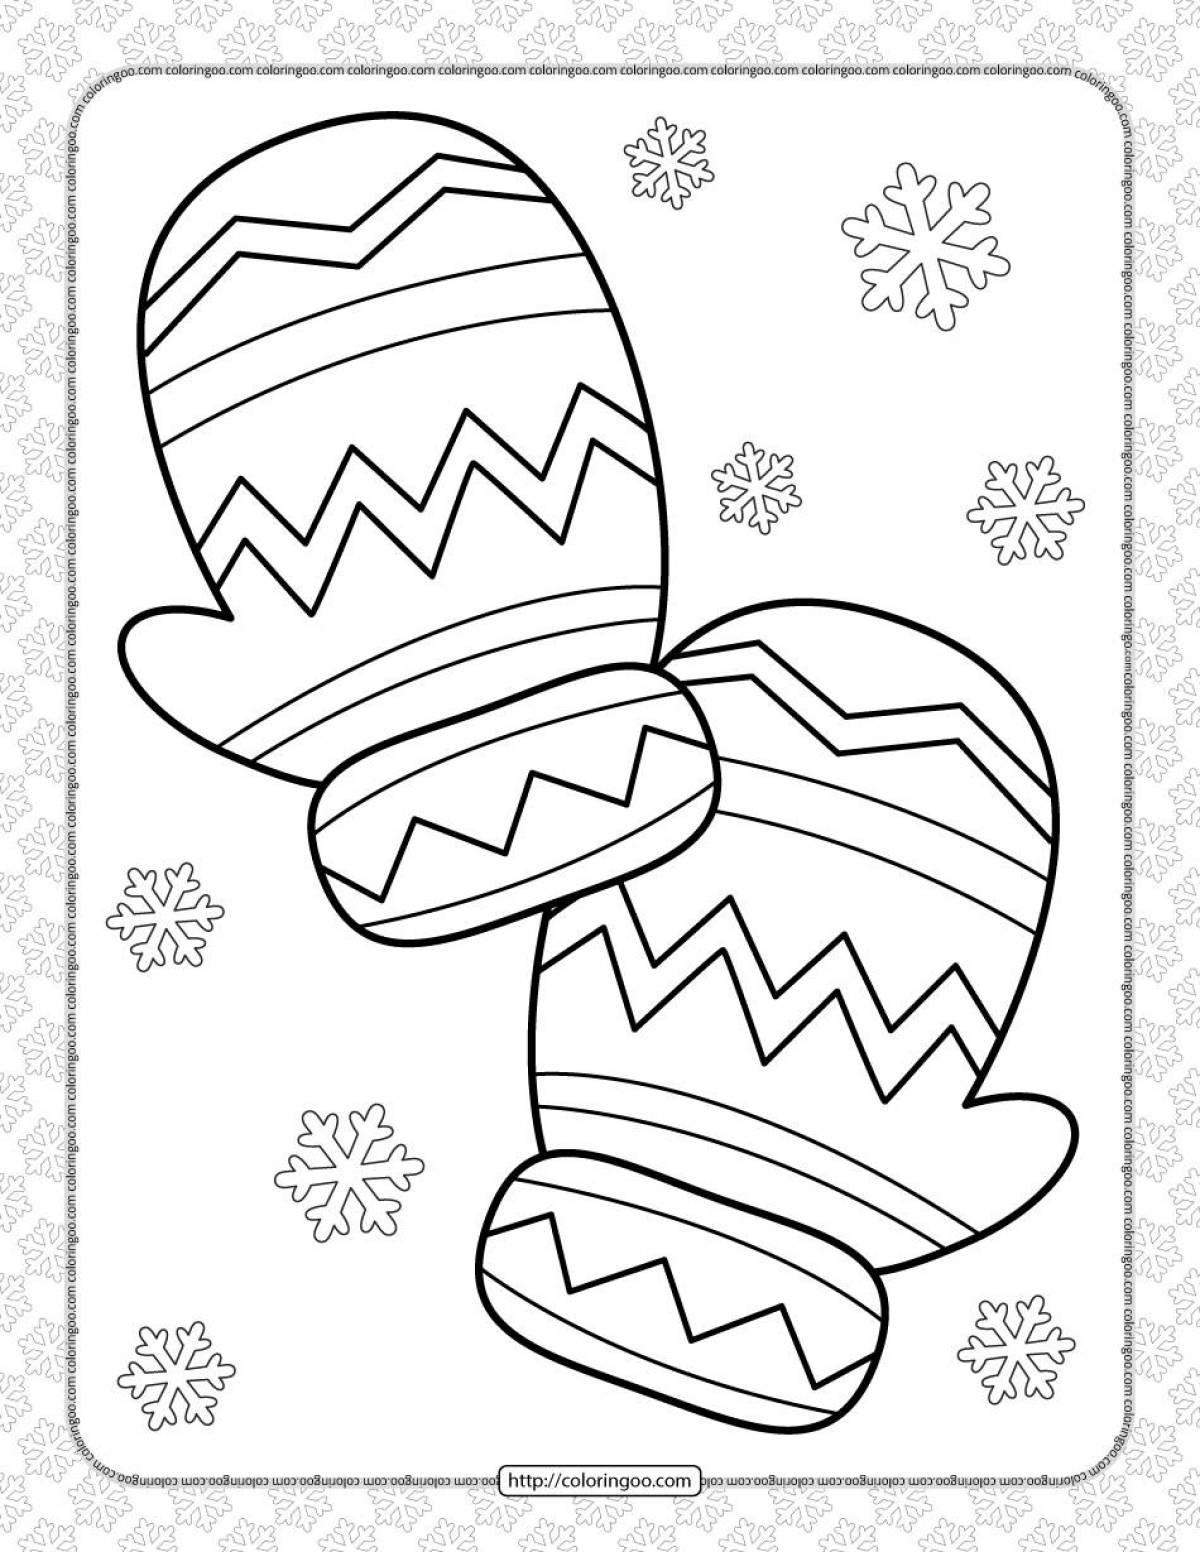 Shiny Mitten coloring page